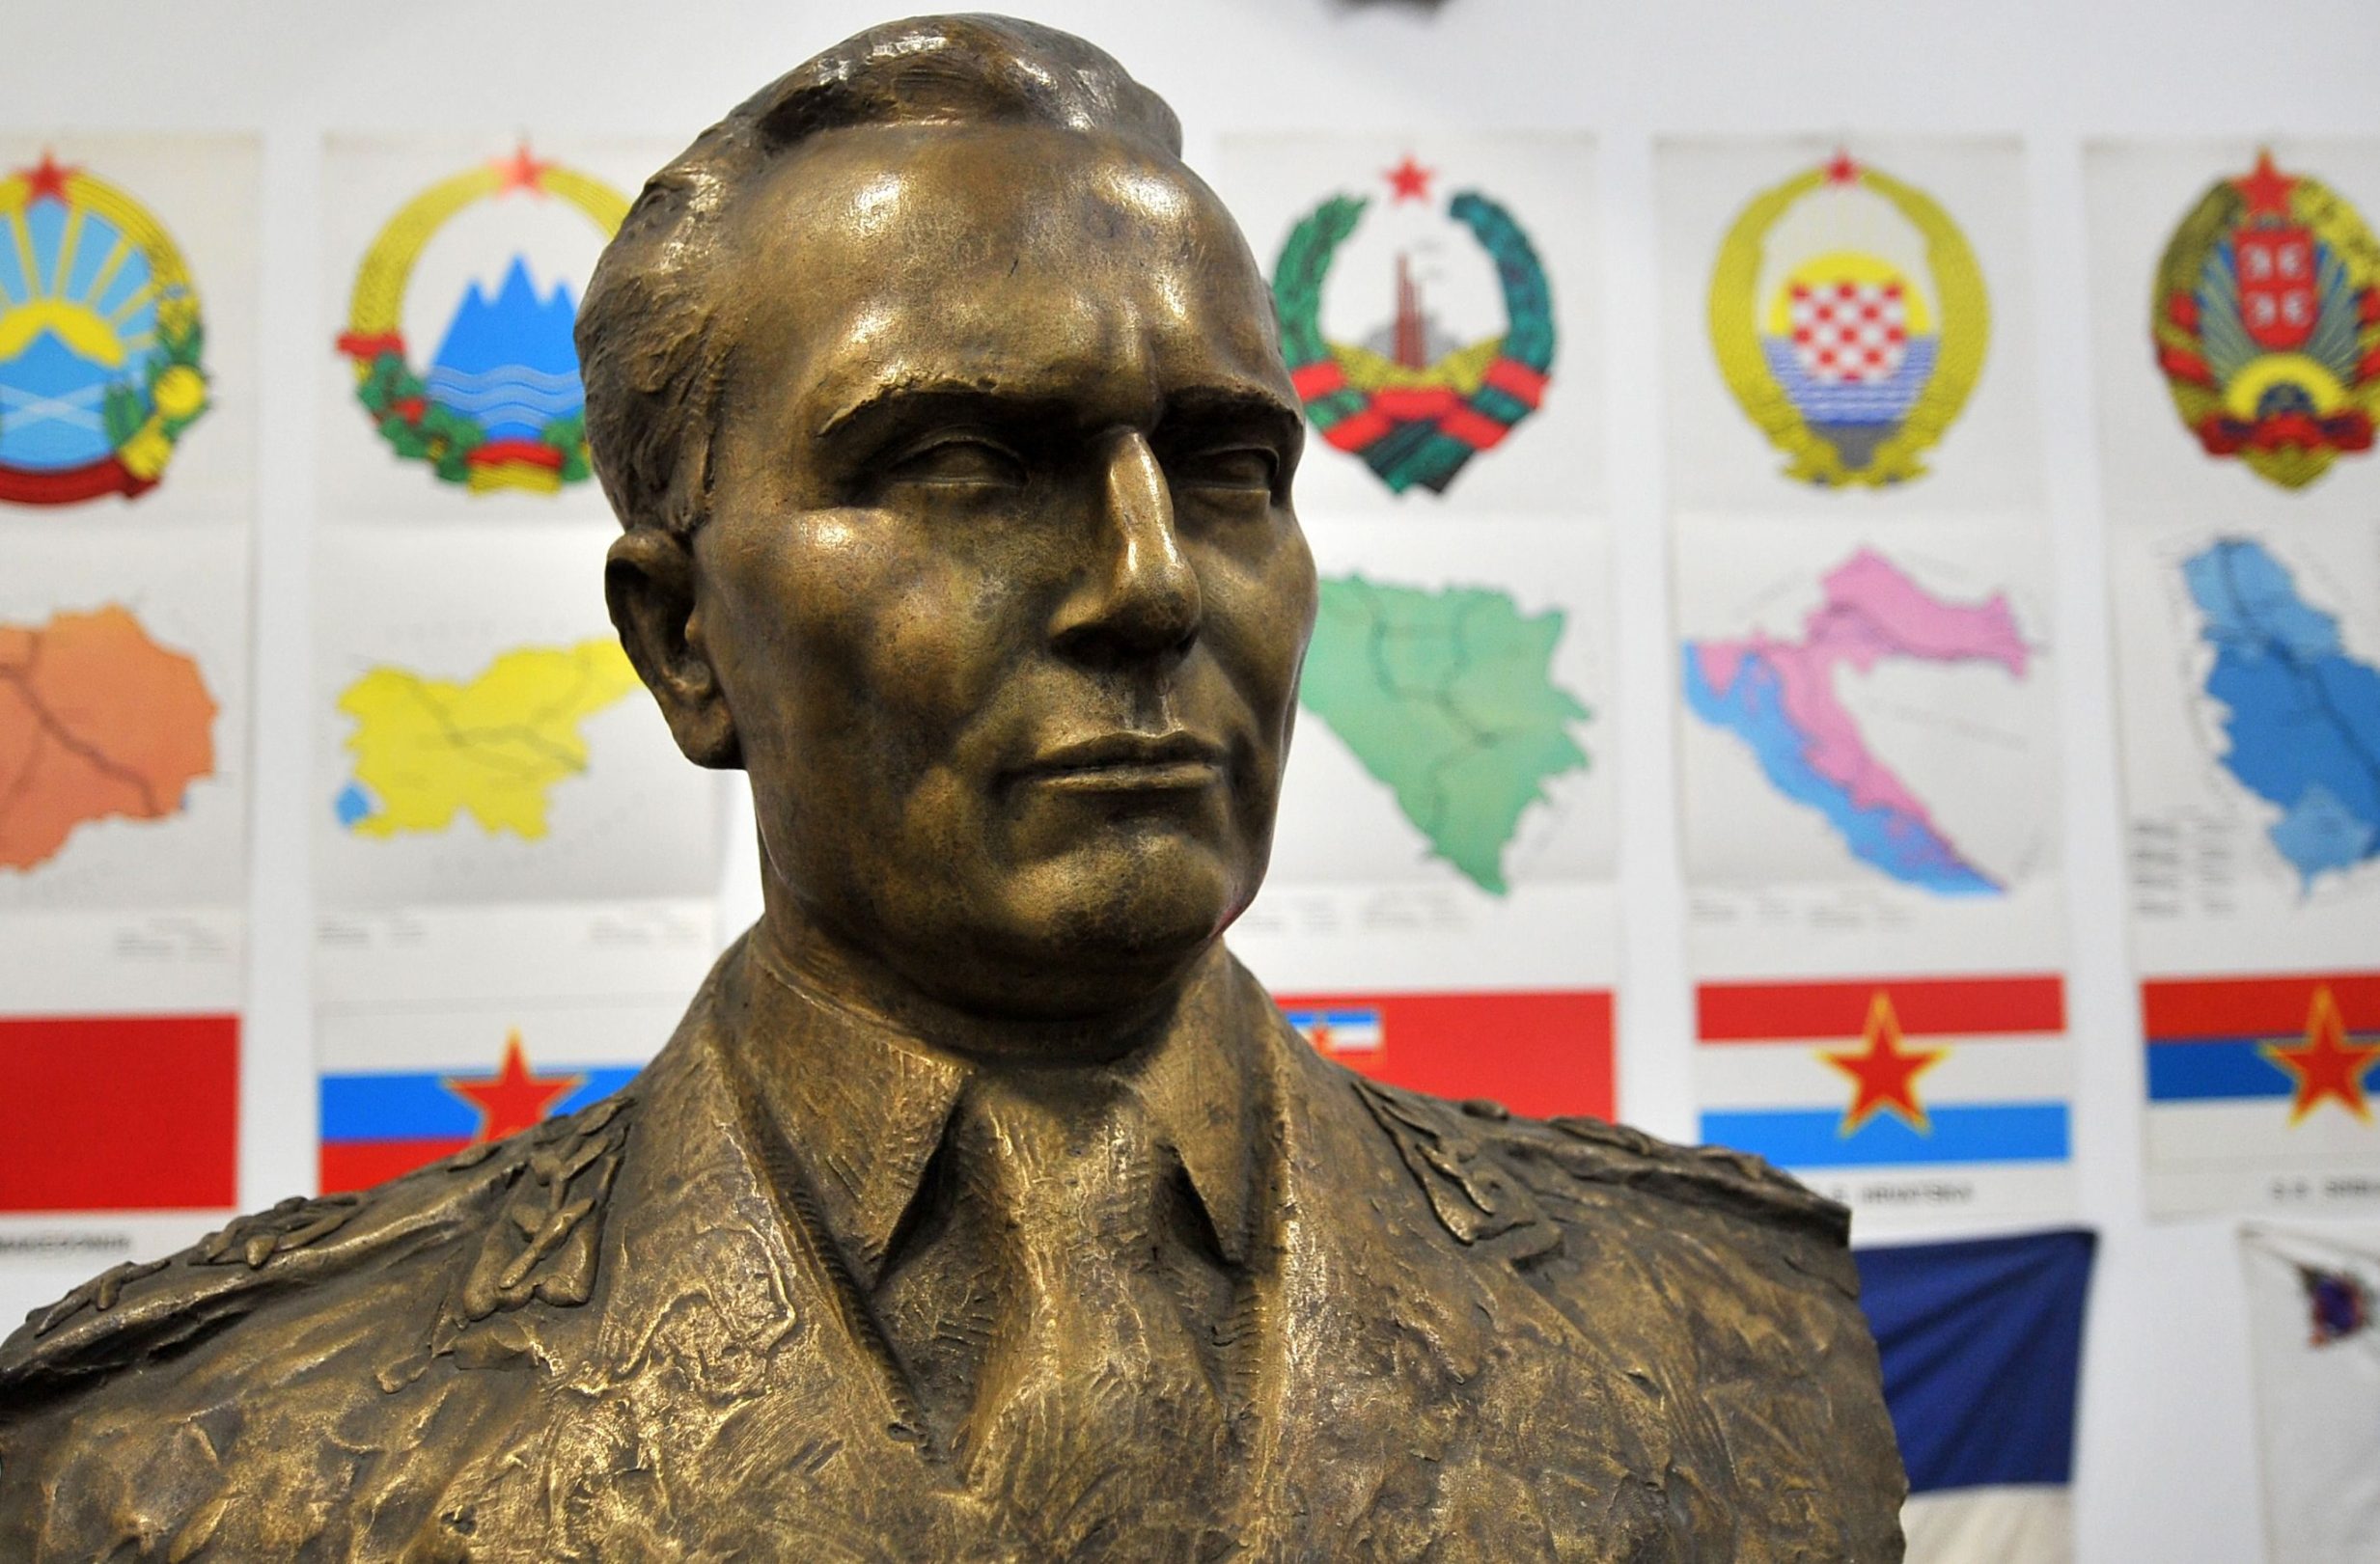 A picture taken on April 25, 2020 shows a bronze bust of ex-Yugoslav, socialist leader Josip Broz Tito at the entrance of 